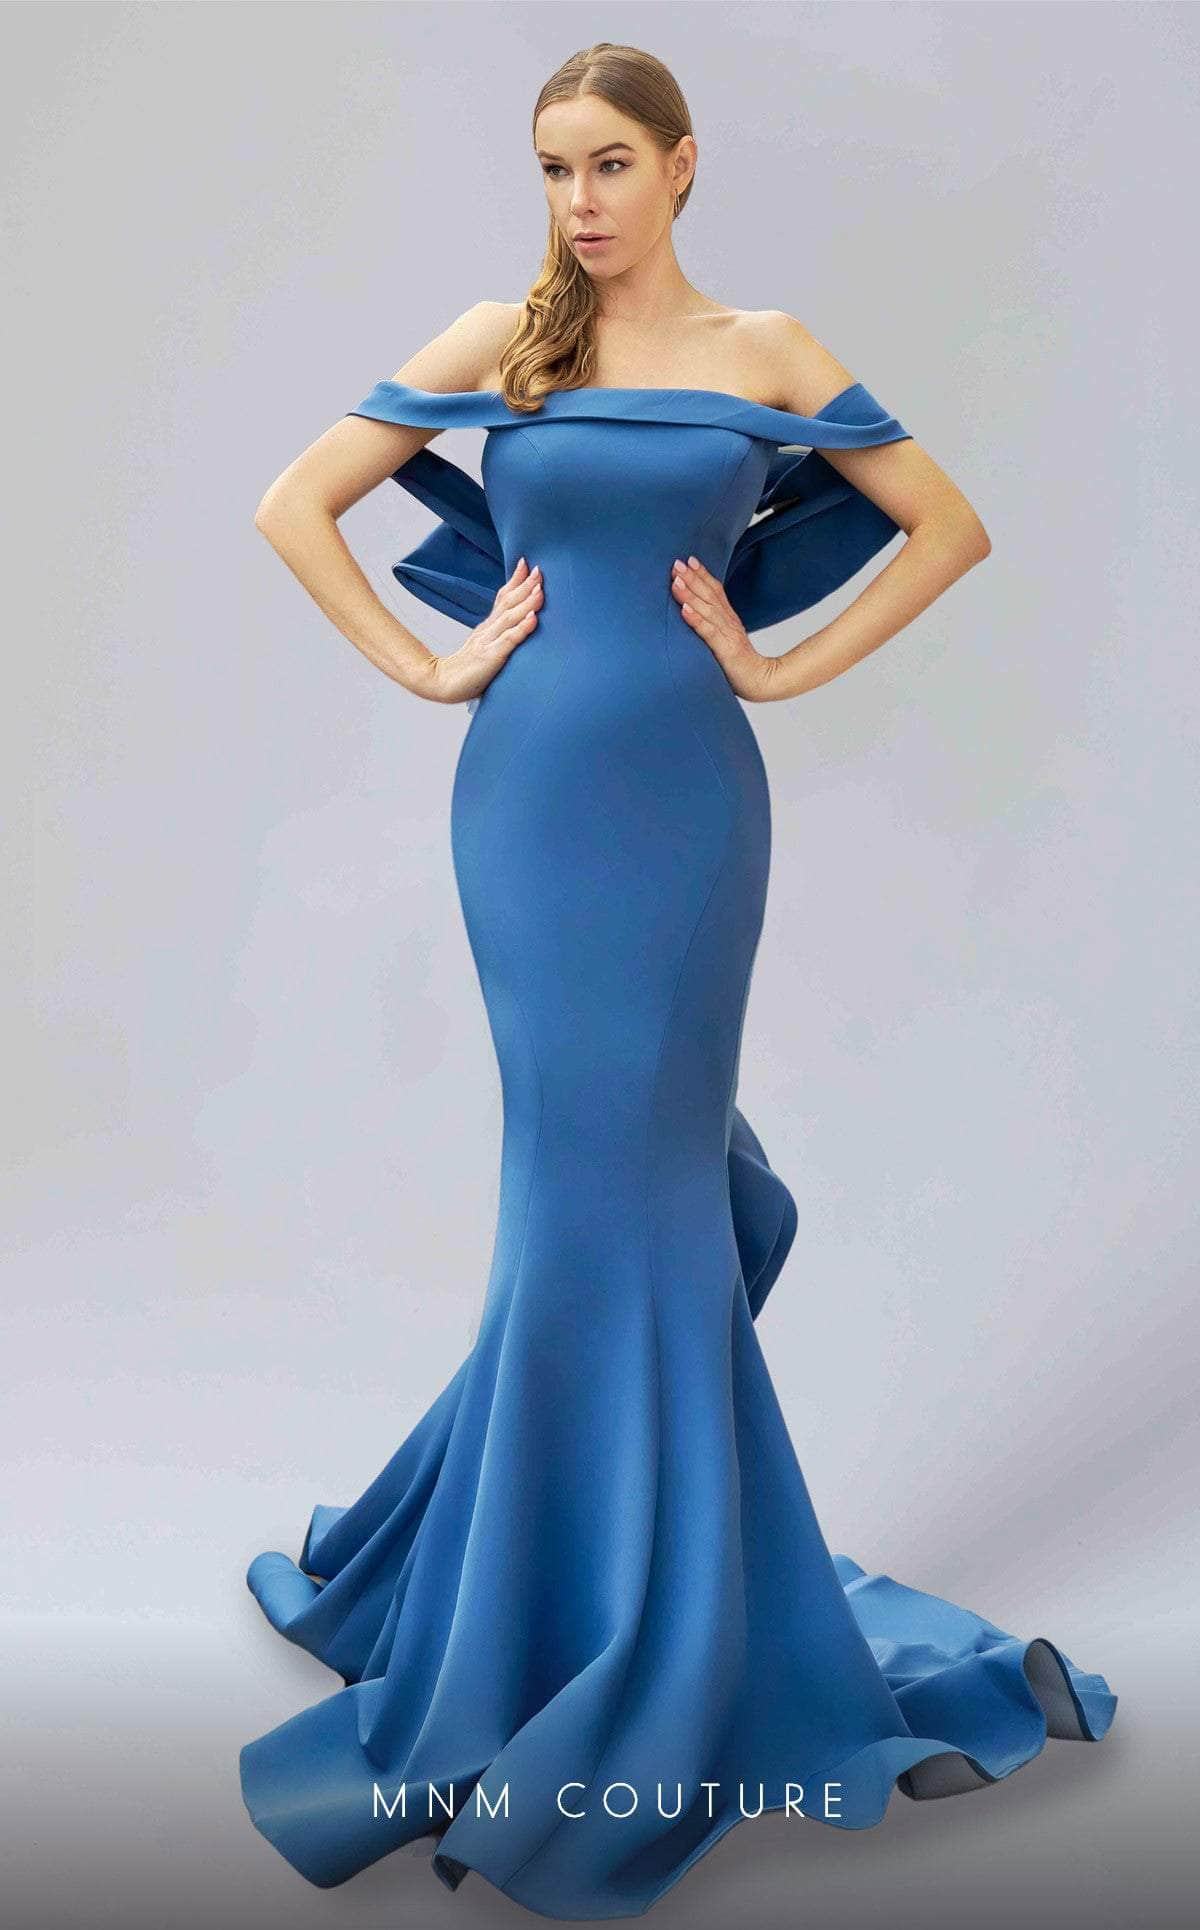 MNM Couture - Off-Shoulder Ruffled Mermaid Gown N0145 Evening Dresses